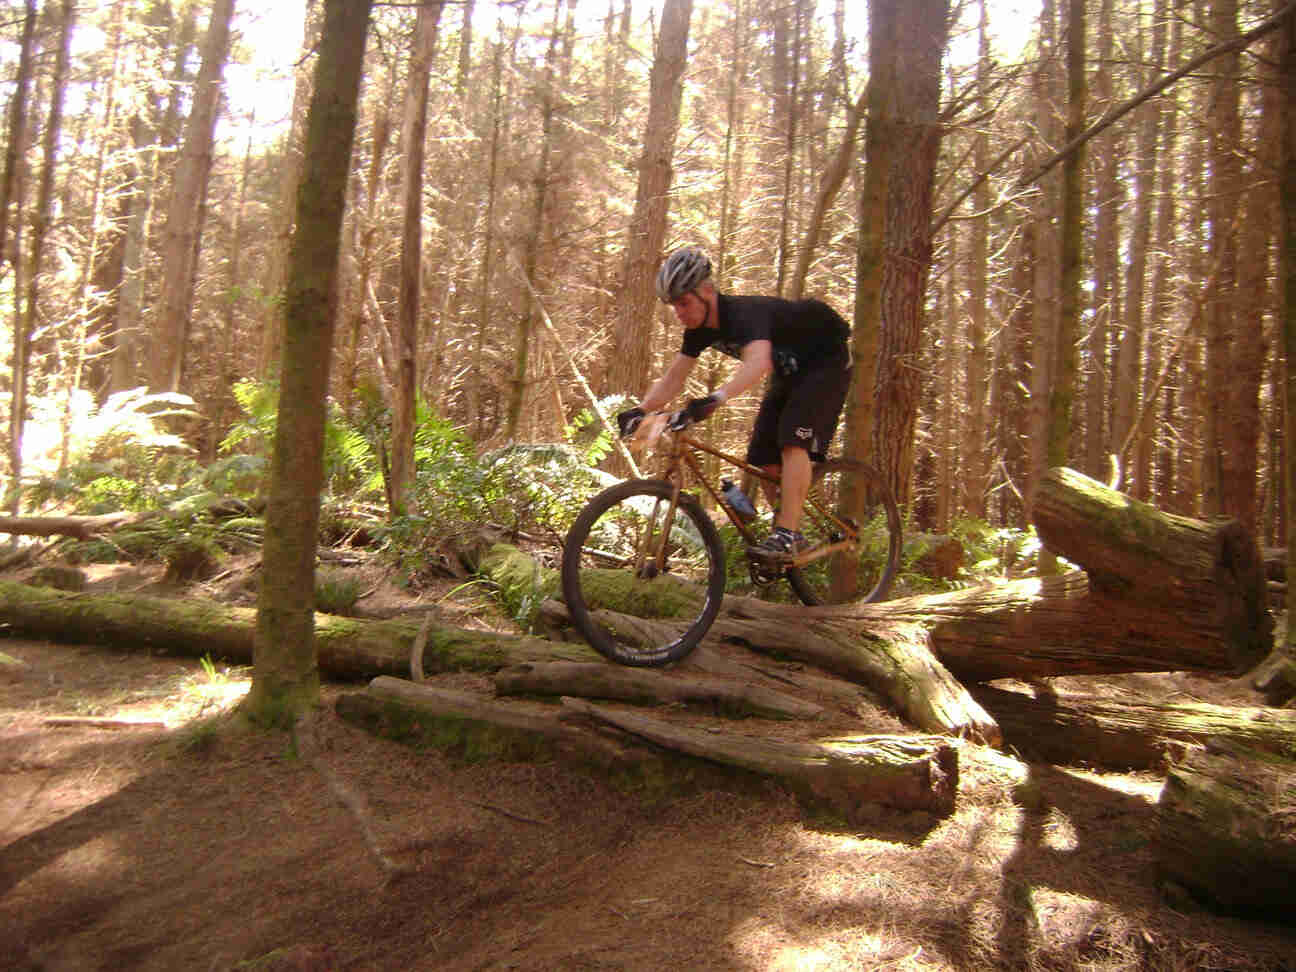 Left side view of a cyclist, riding a Surly bike over a stack of fallen trees, on a dirt trail in the forest